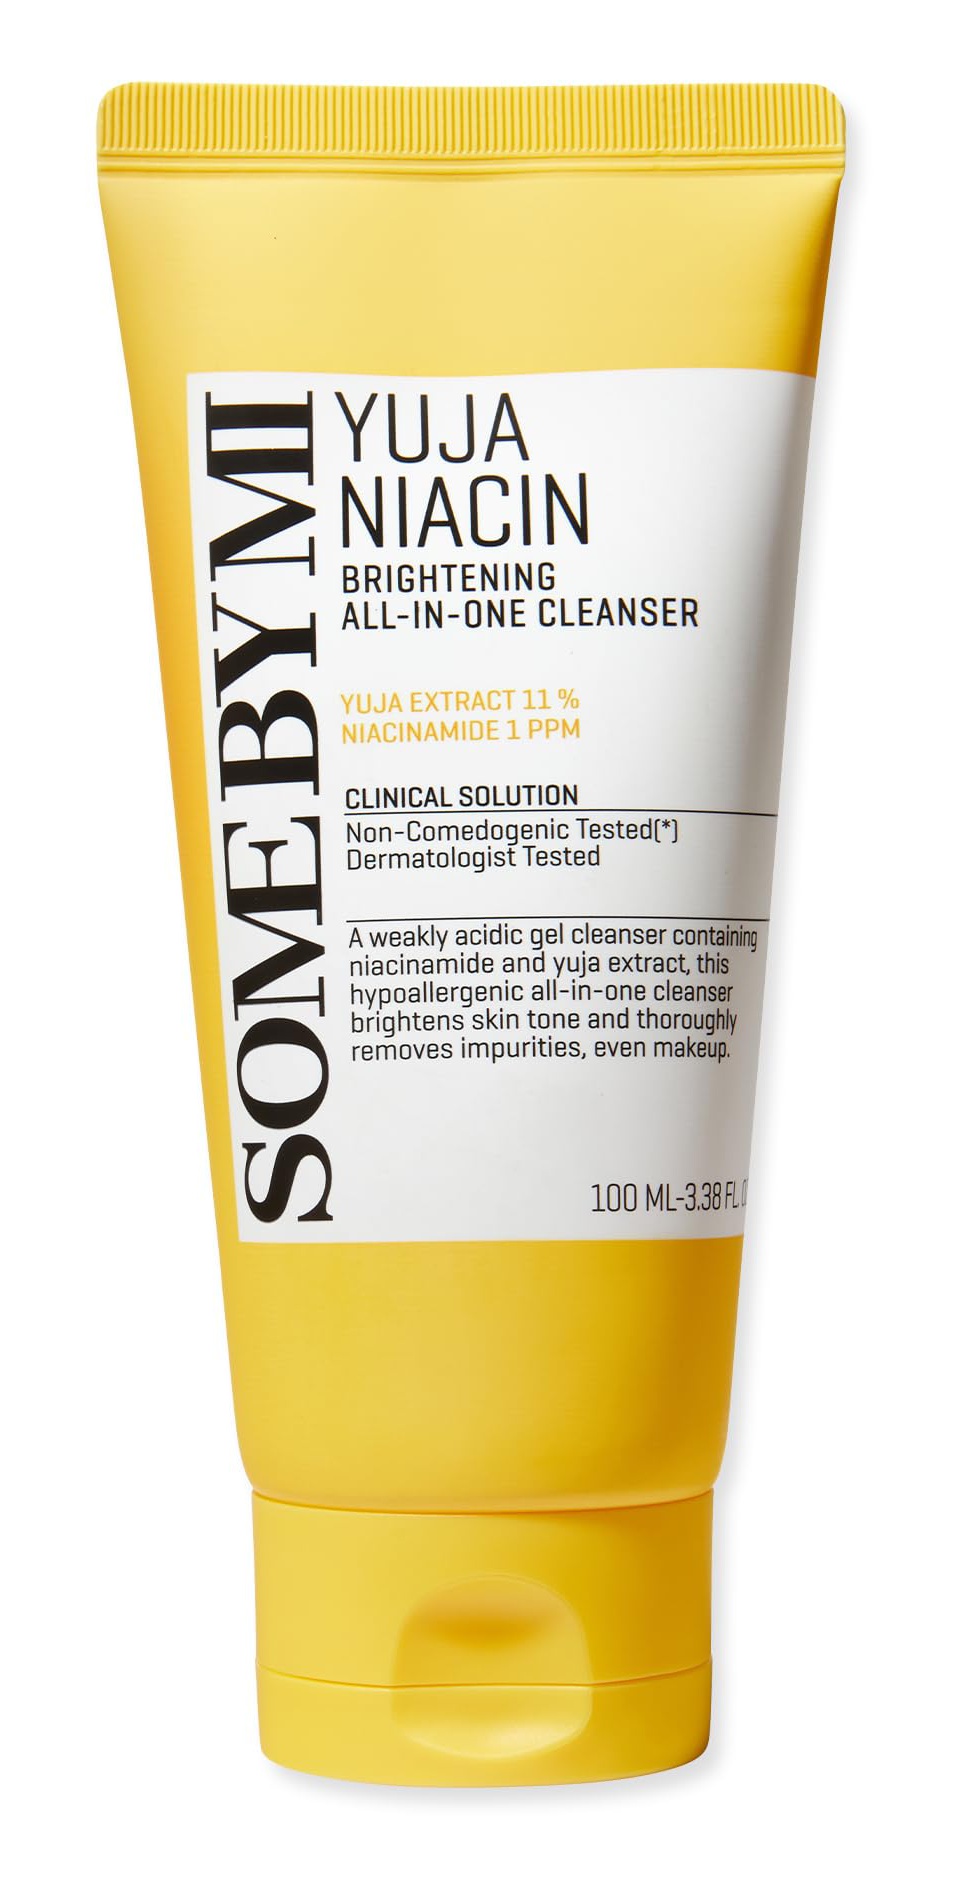 Some By Mi Yuja Niacin Brightening All-in-one Cleanser